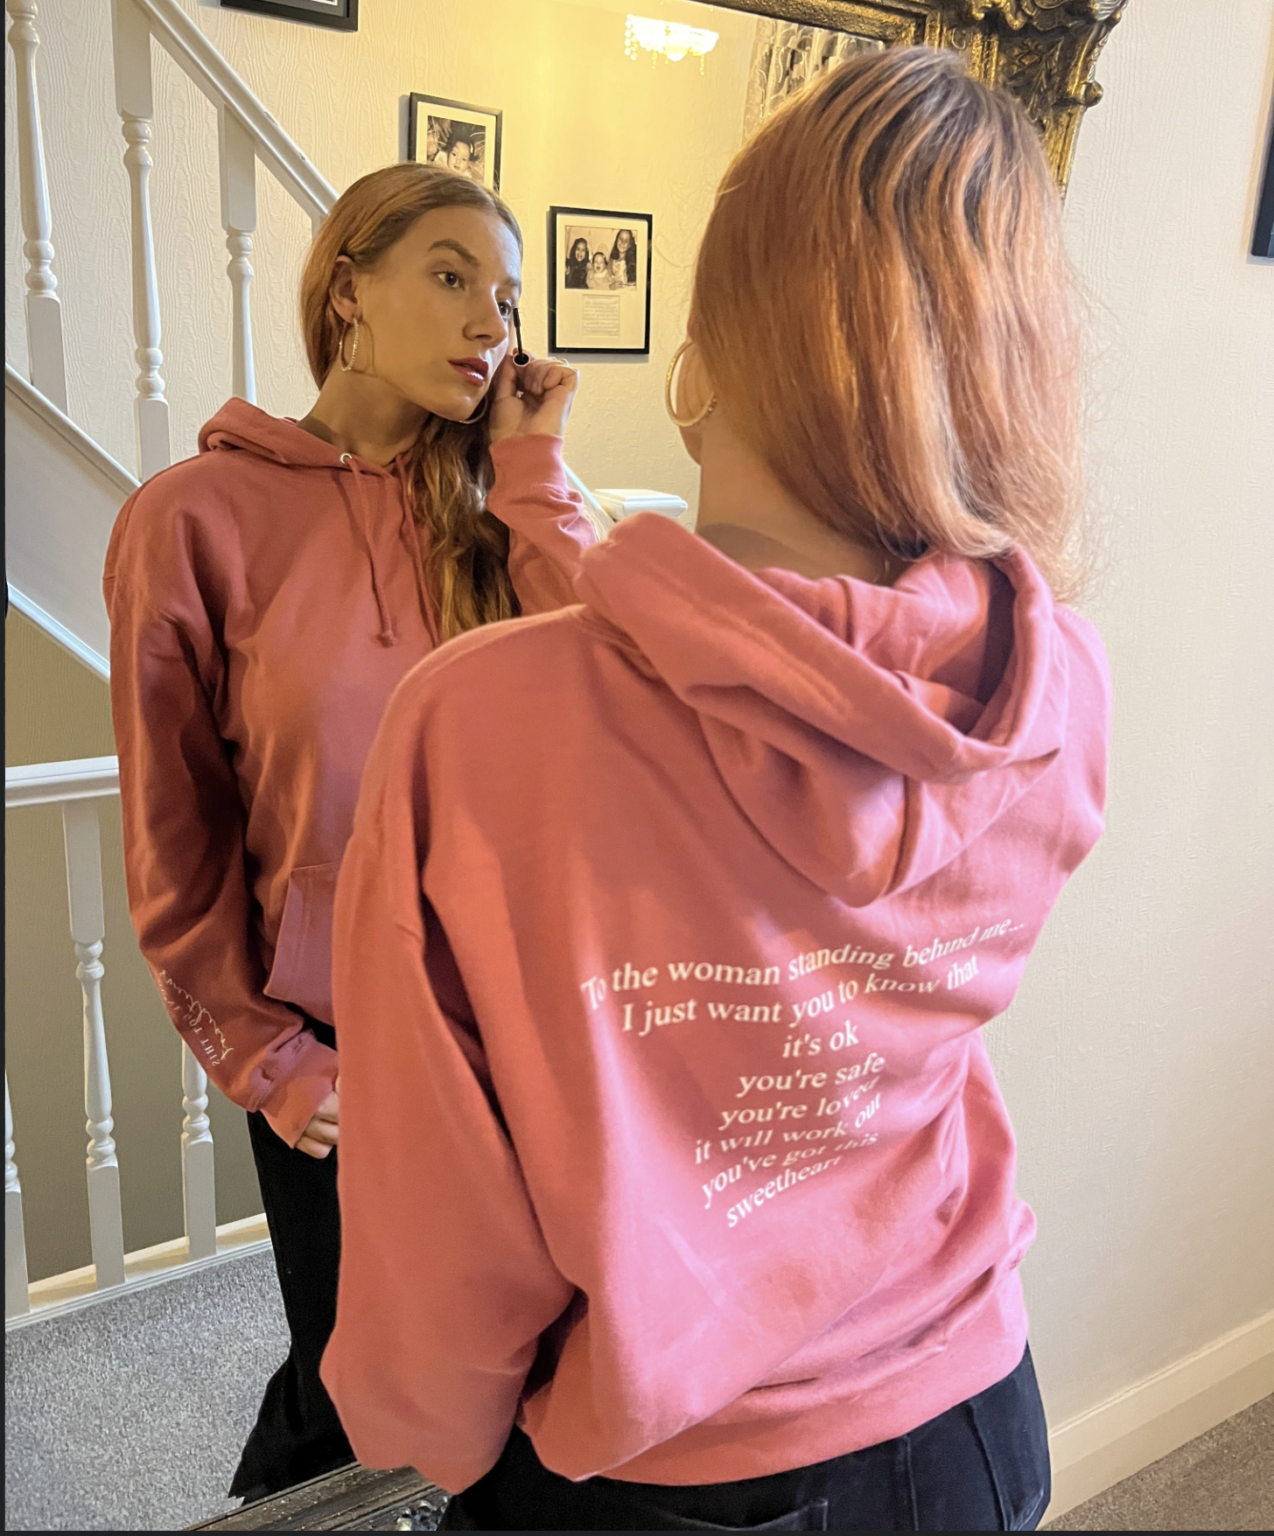 You Are Safe, You Are Loved Hoodie ( pink )